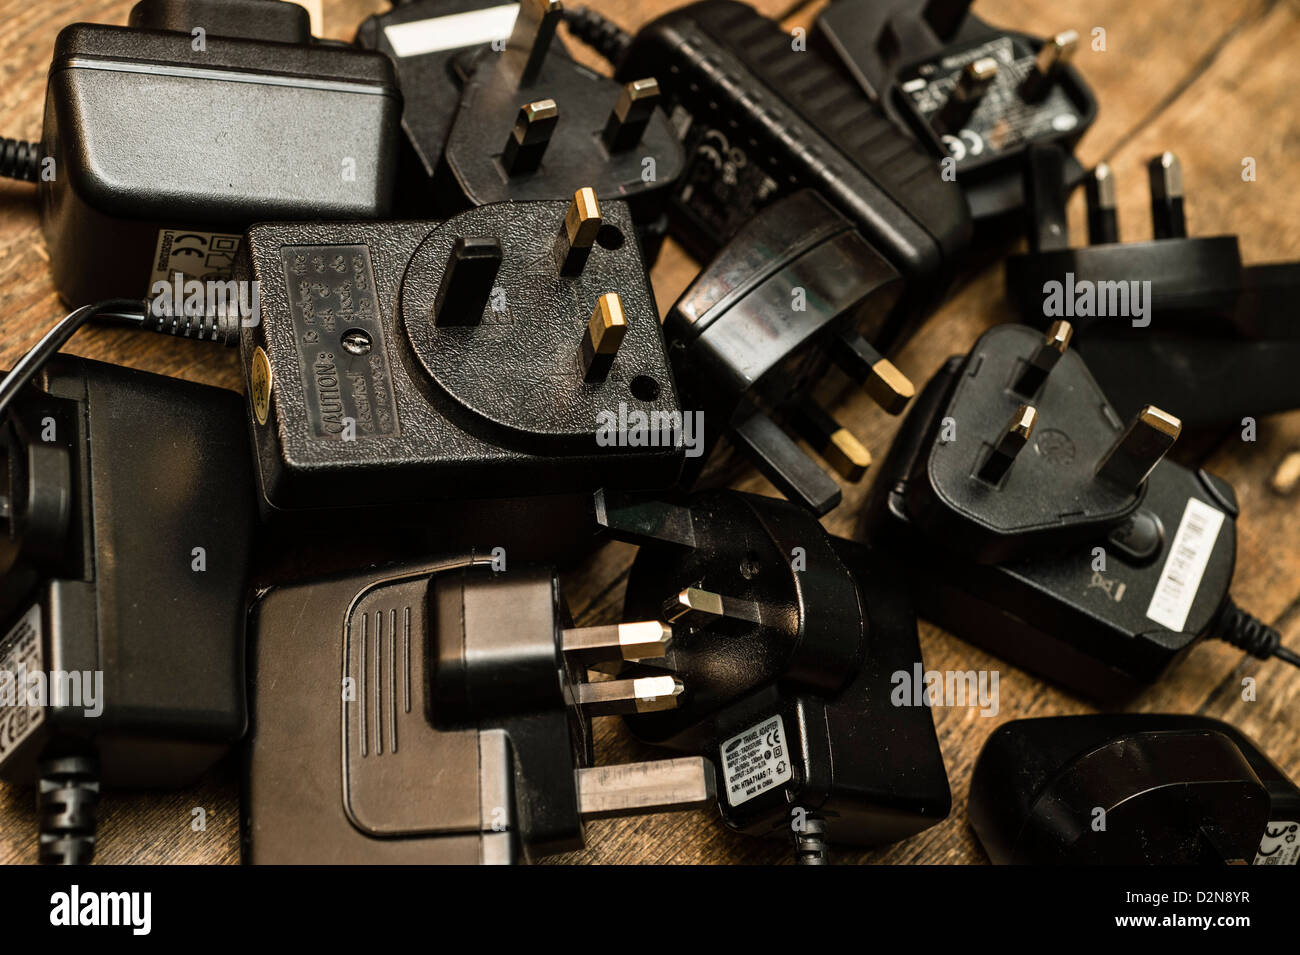 A pile of old redundant mobile phone chargers and other electrical power adaptors UK Stock Photo